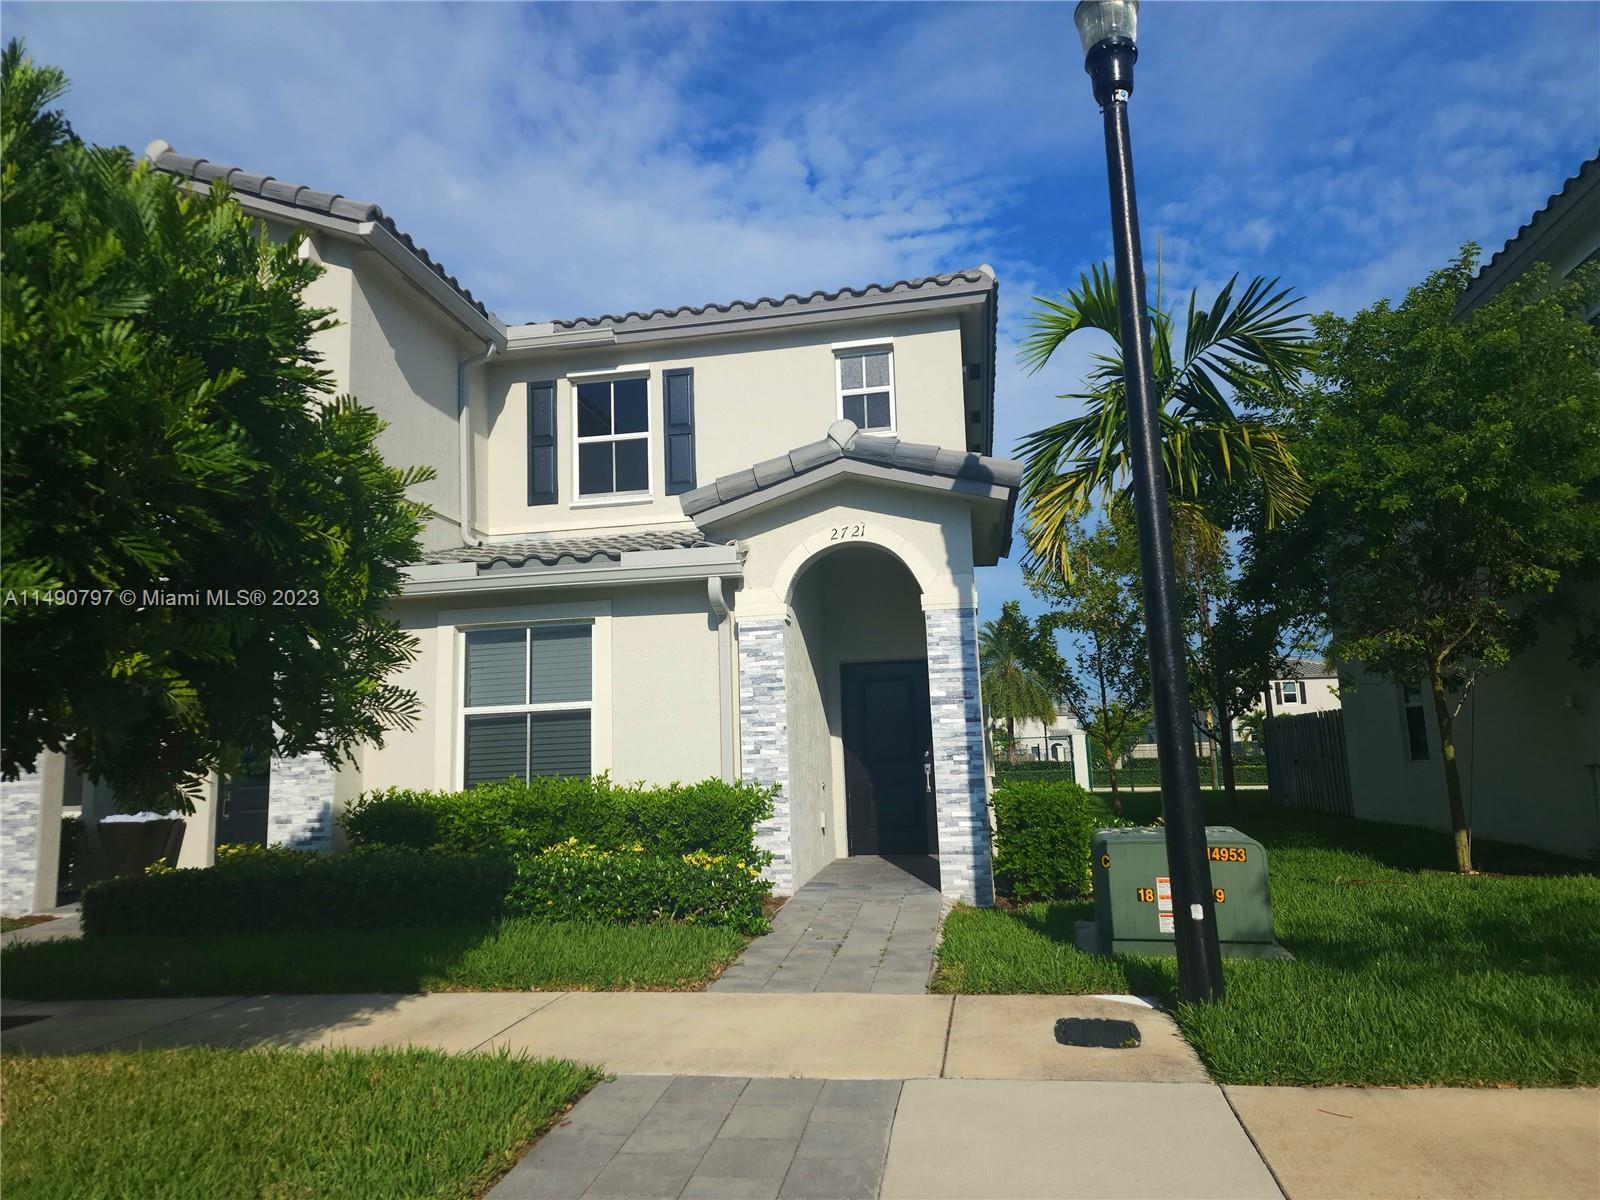 Photo of 2721 SE 15th St #2721 in Homestead, FL